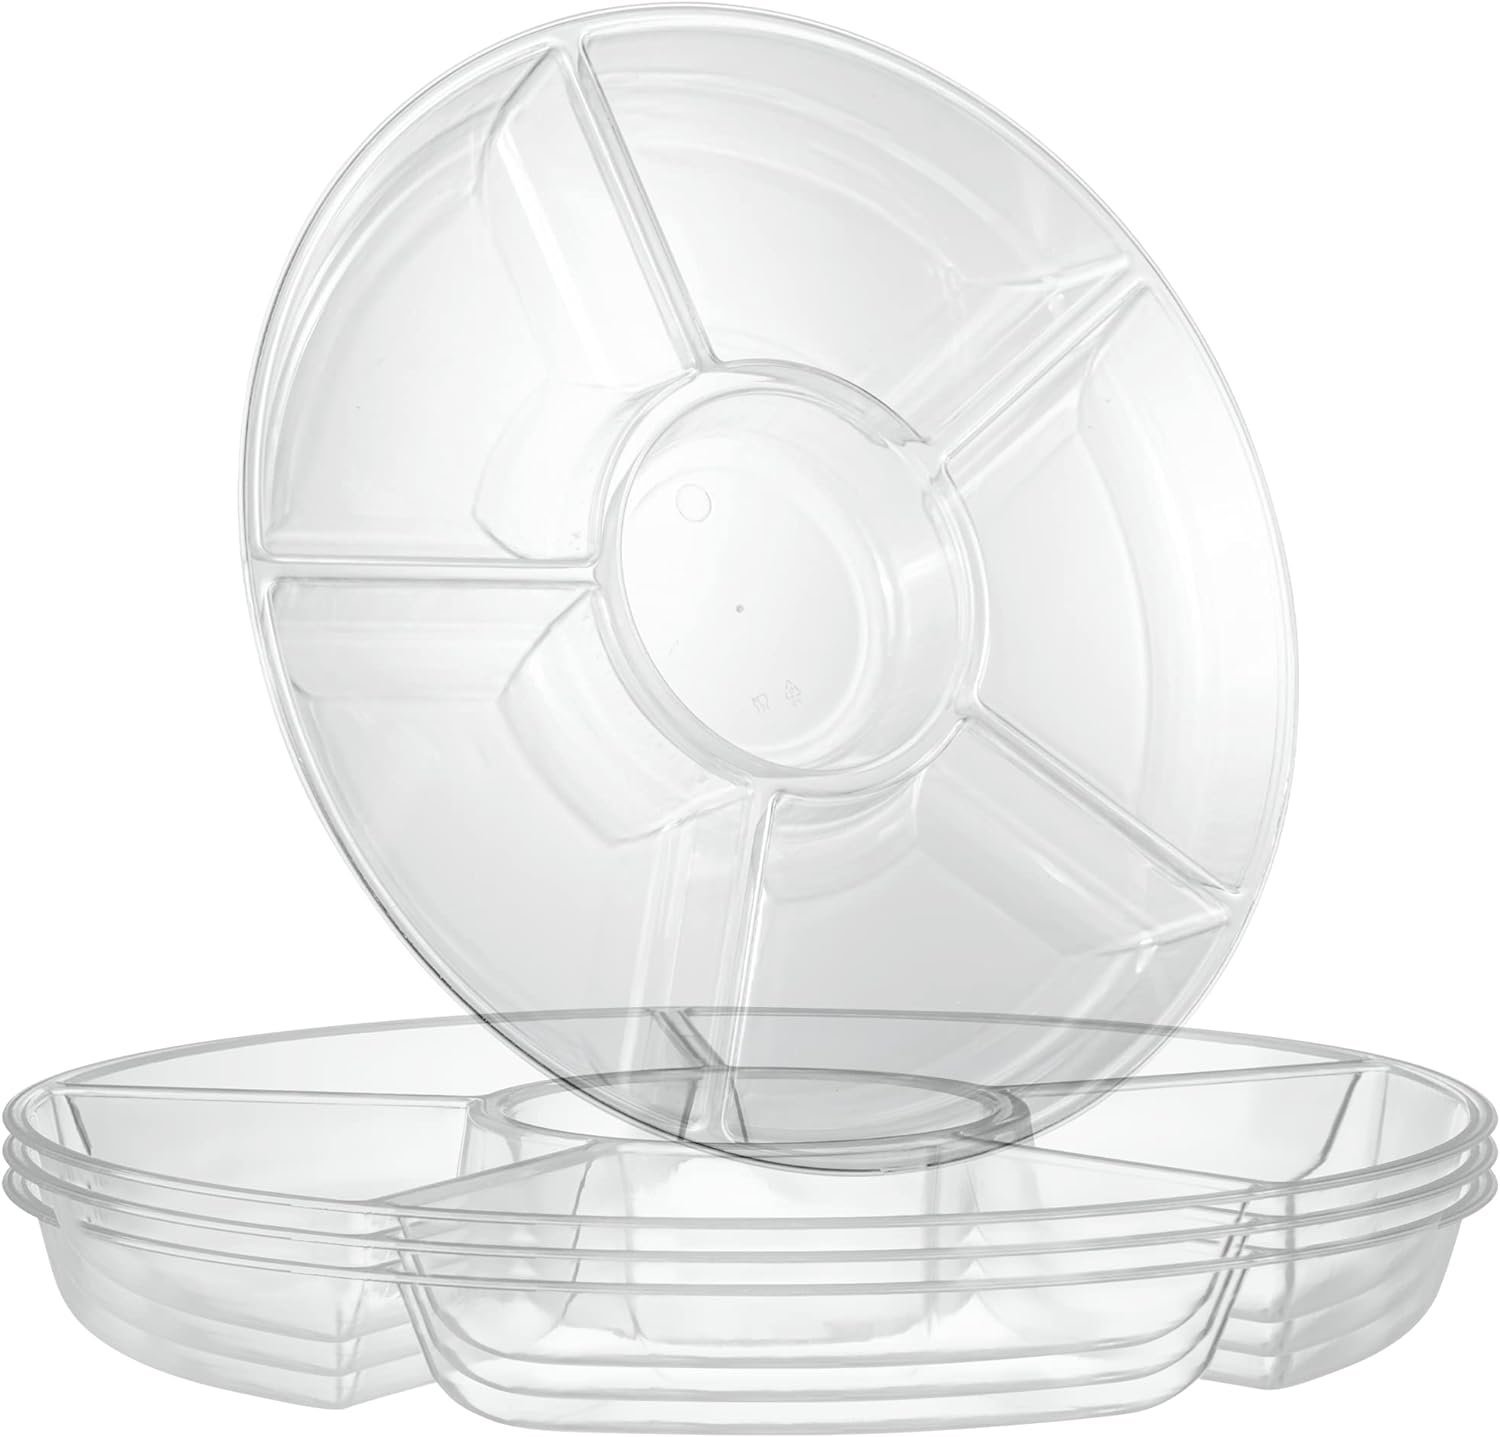 PLASTICPRO 6 Sectional Round Plastic Serving Tray/Platters Clear Pack of 2